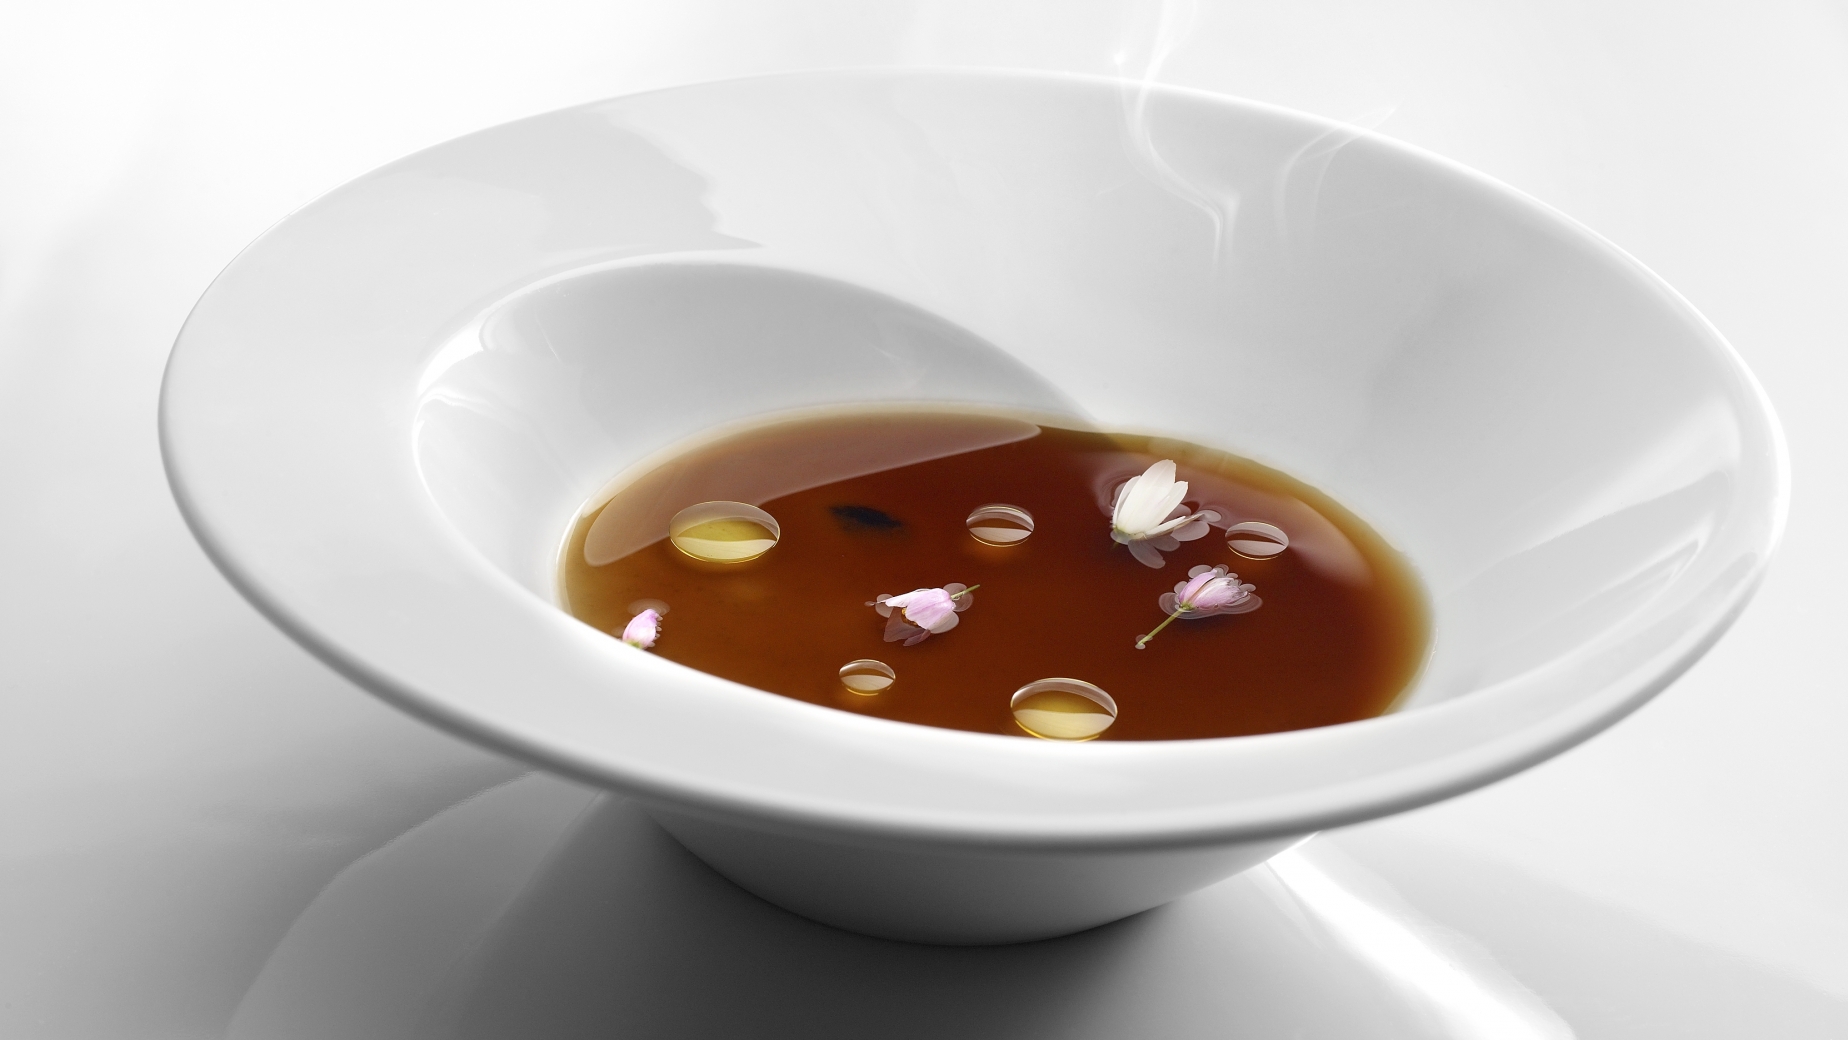 Jellied vegetable stock on a sticky paste of rice and baby squid.
PHOTO: José Luis López de Zubiría / Mugaritz